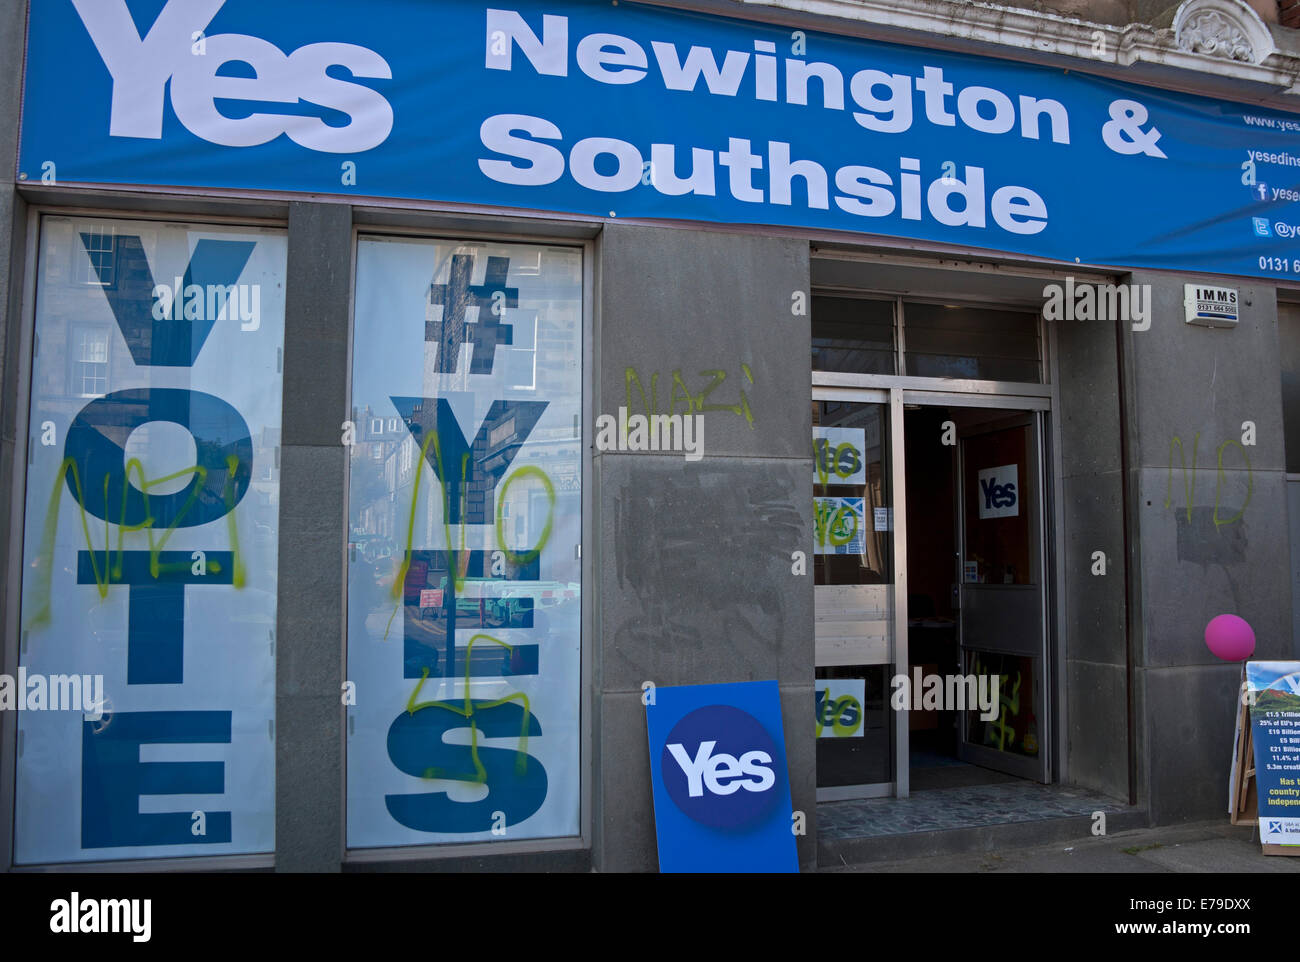 Edinburgh, Scotland,UK. 10th Sept. 2014. Independence Referendum, shop for Yes campaign daubed with nazi swastika and no slogans, in Newington, the premises were only opened yesterday at 3pm. Stock Photo